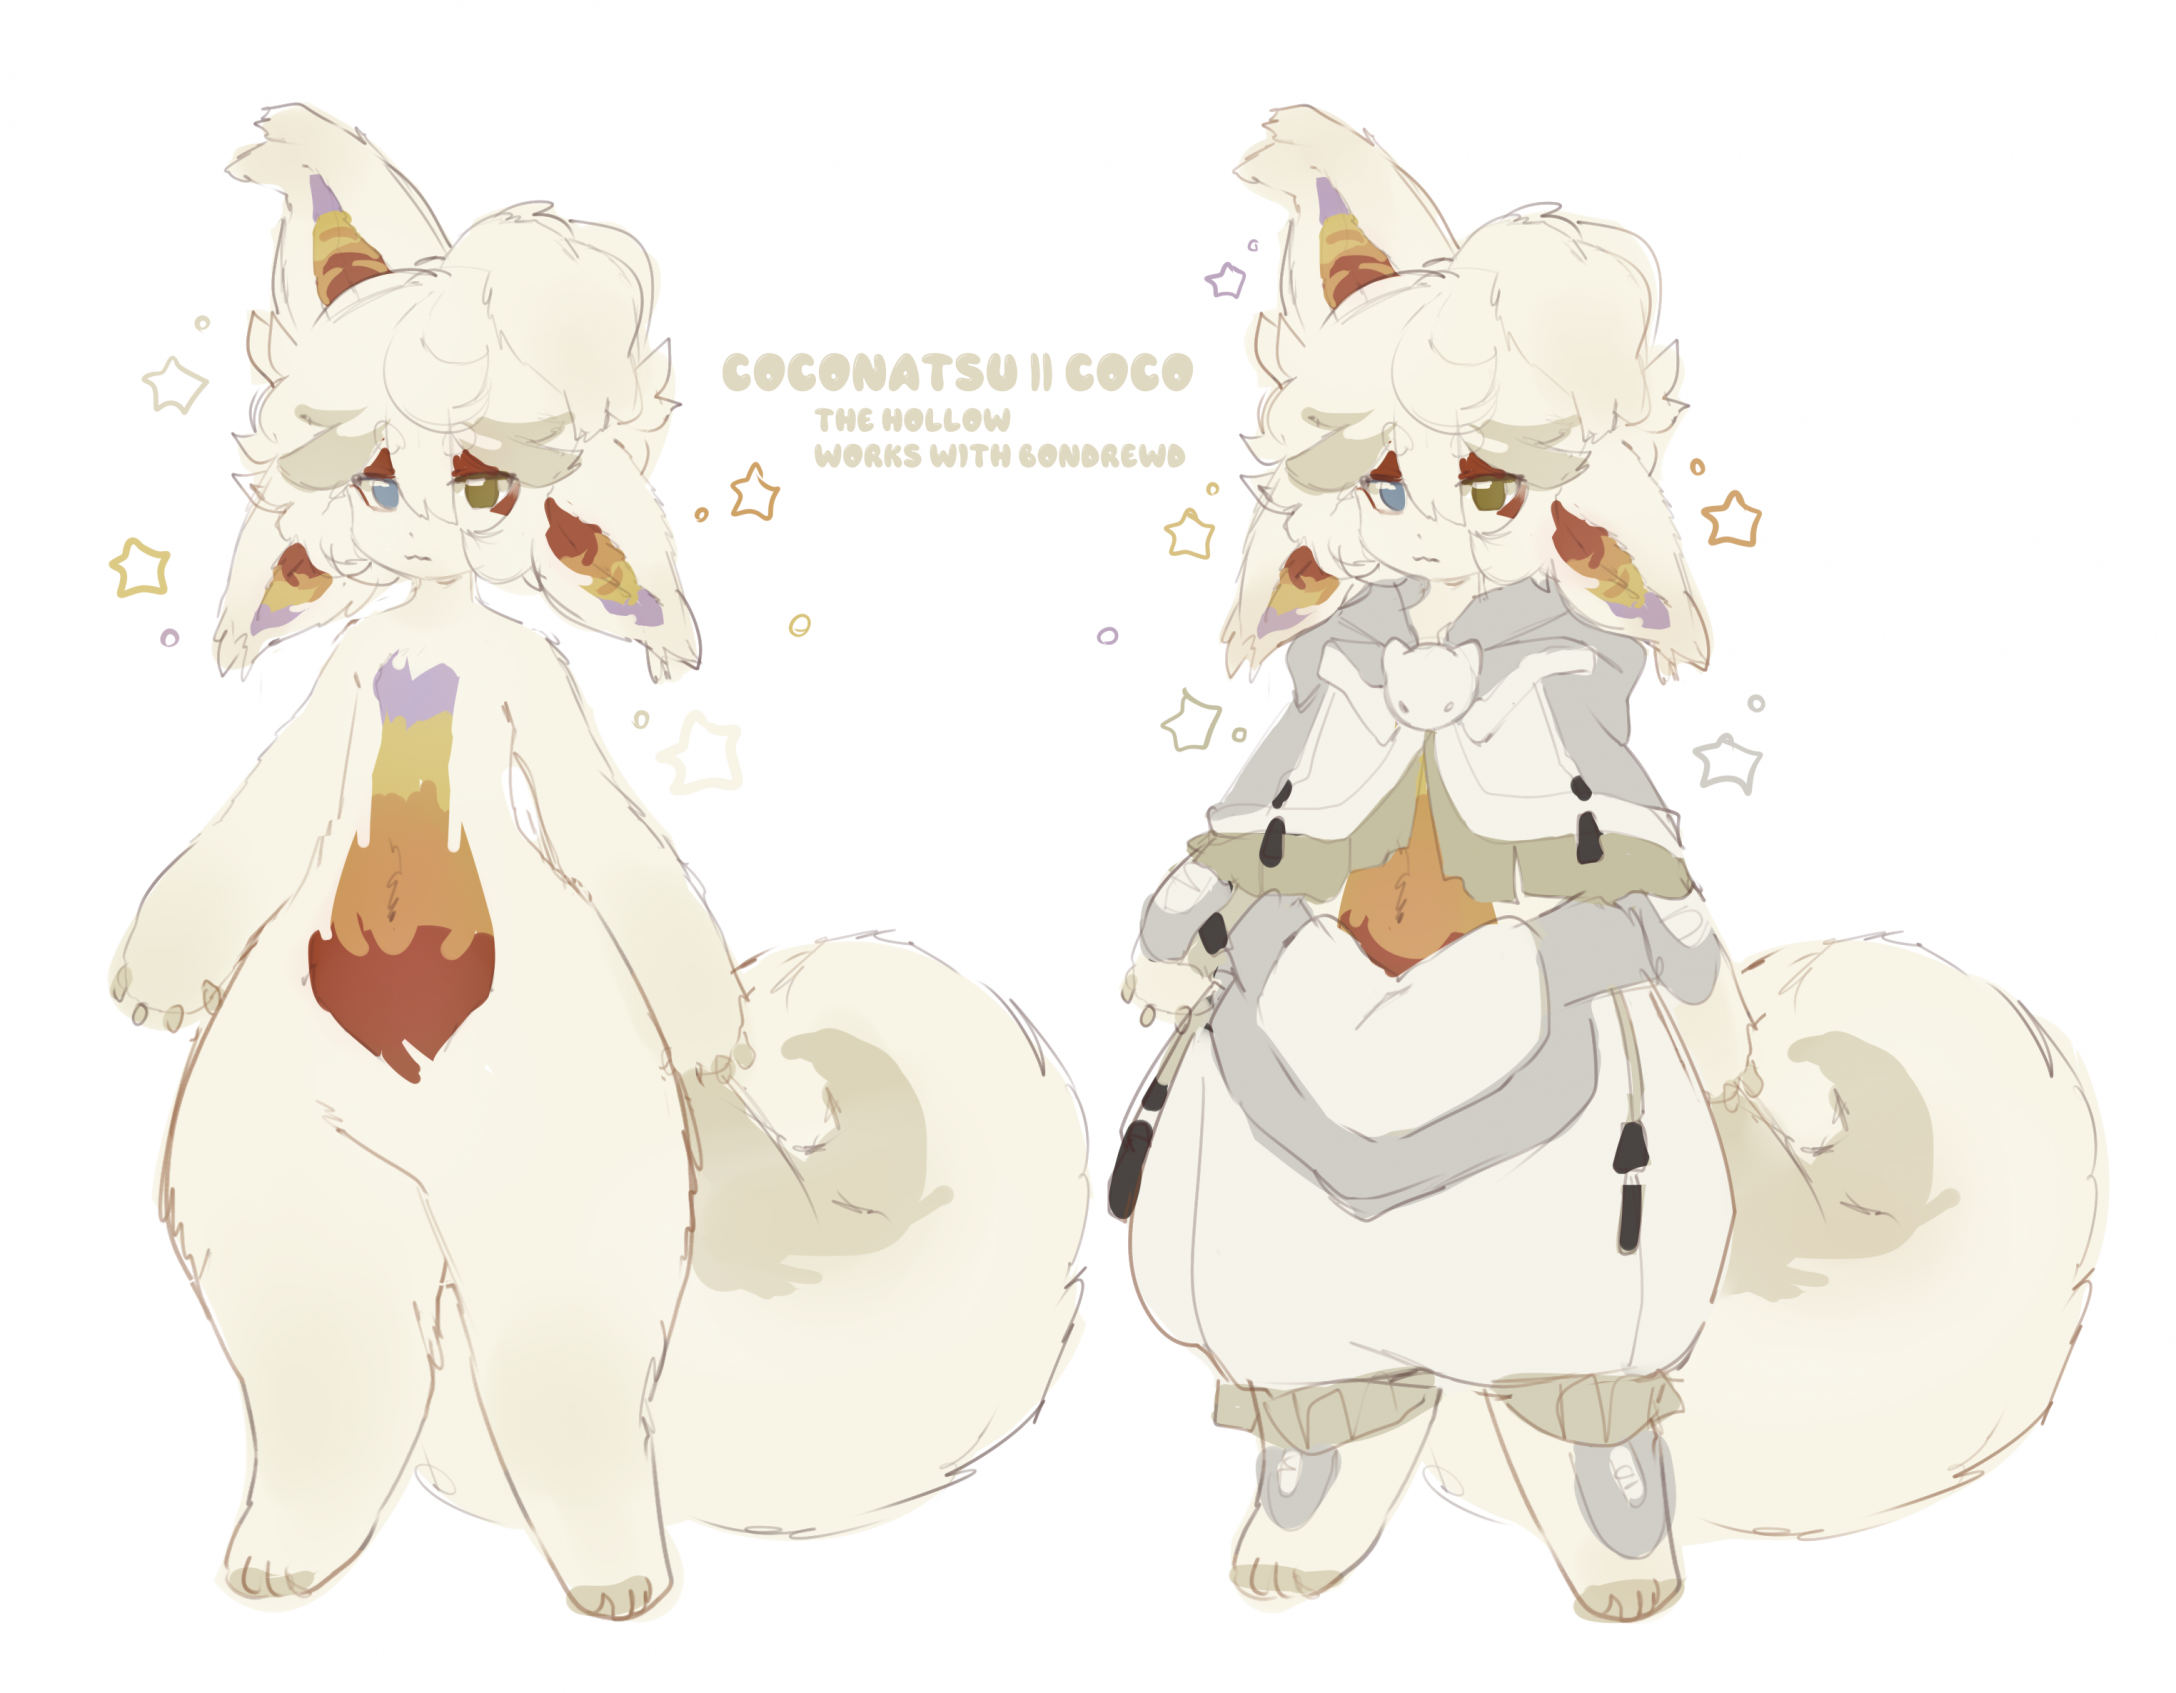 Made in abyss fan character by hornyorangemoi -- Fur Affinity [dot